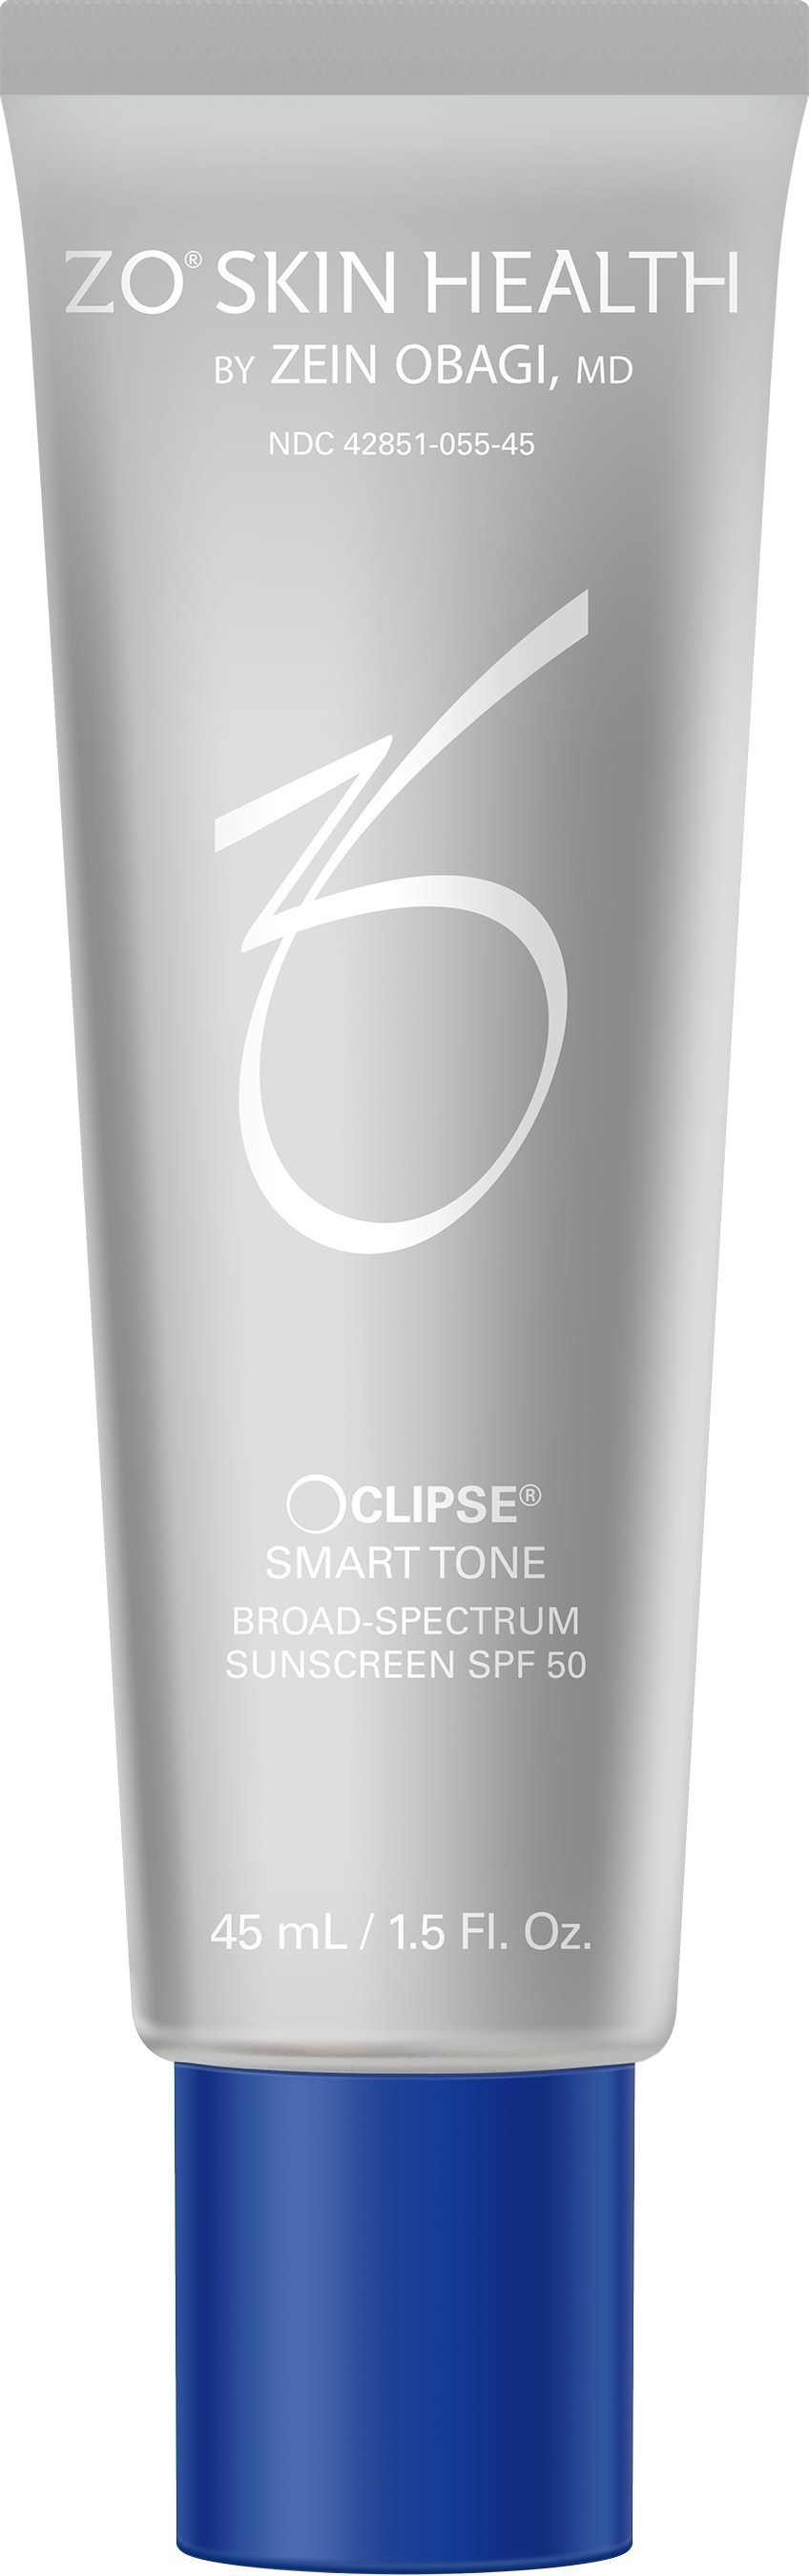 Dr. Zein Obagi launches new sunscreen, Oclipse Smart Tone